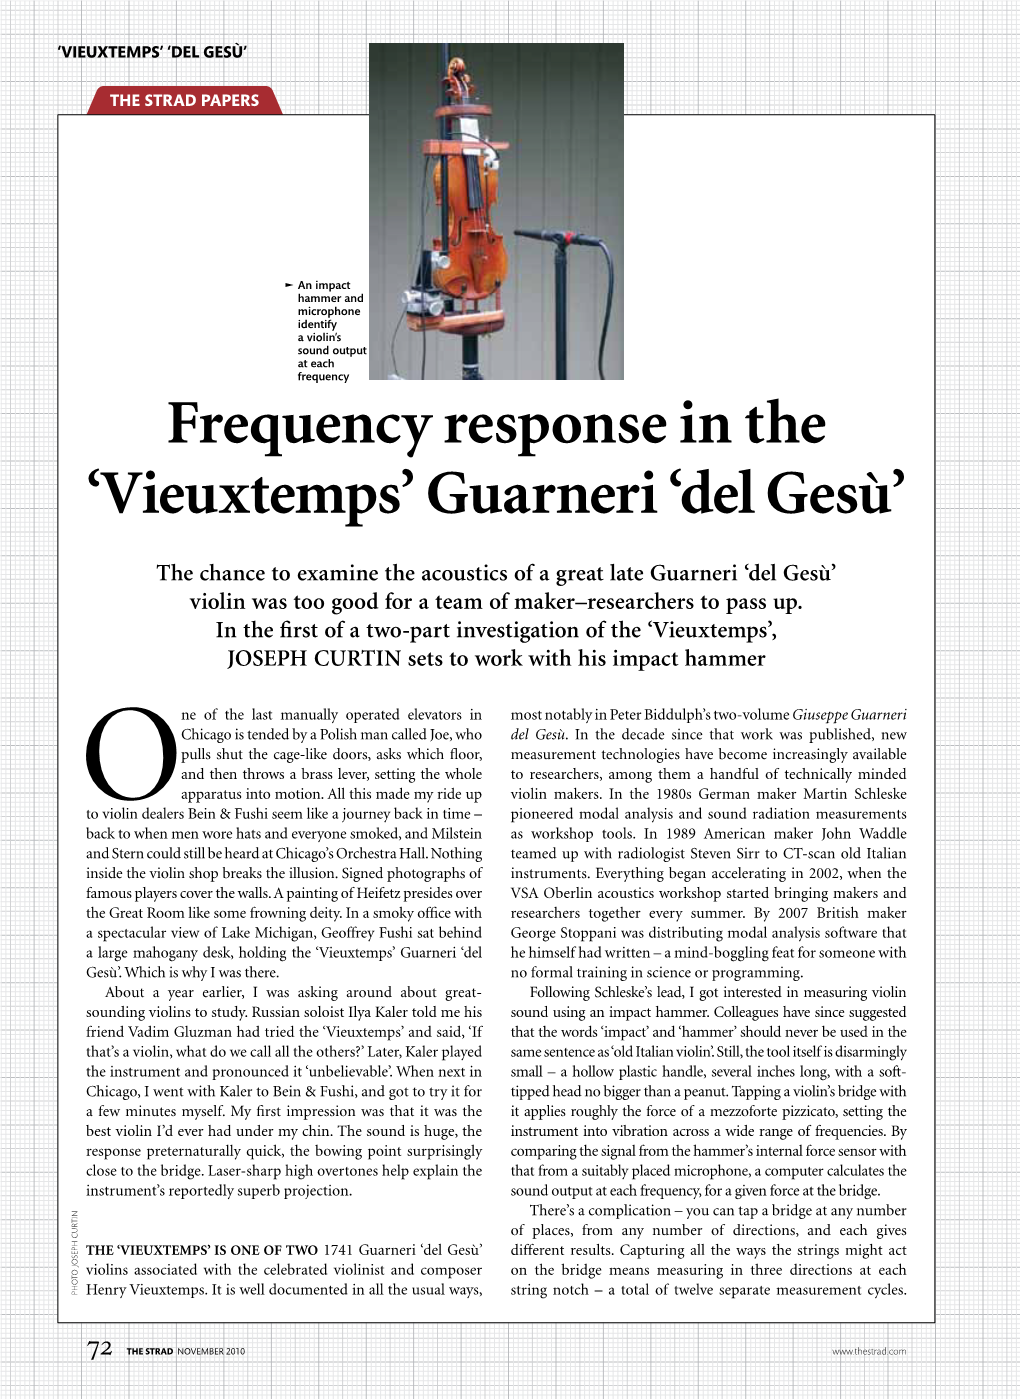 Frequency Response in the 'Vieuxtemps' Guarneri 'Del Gesù'